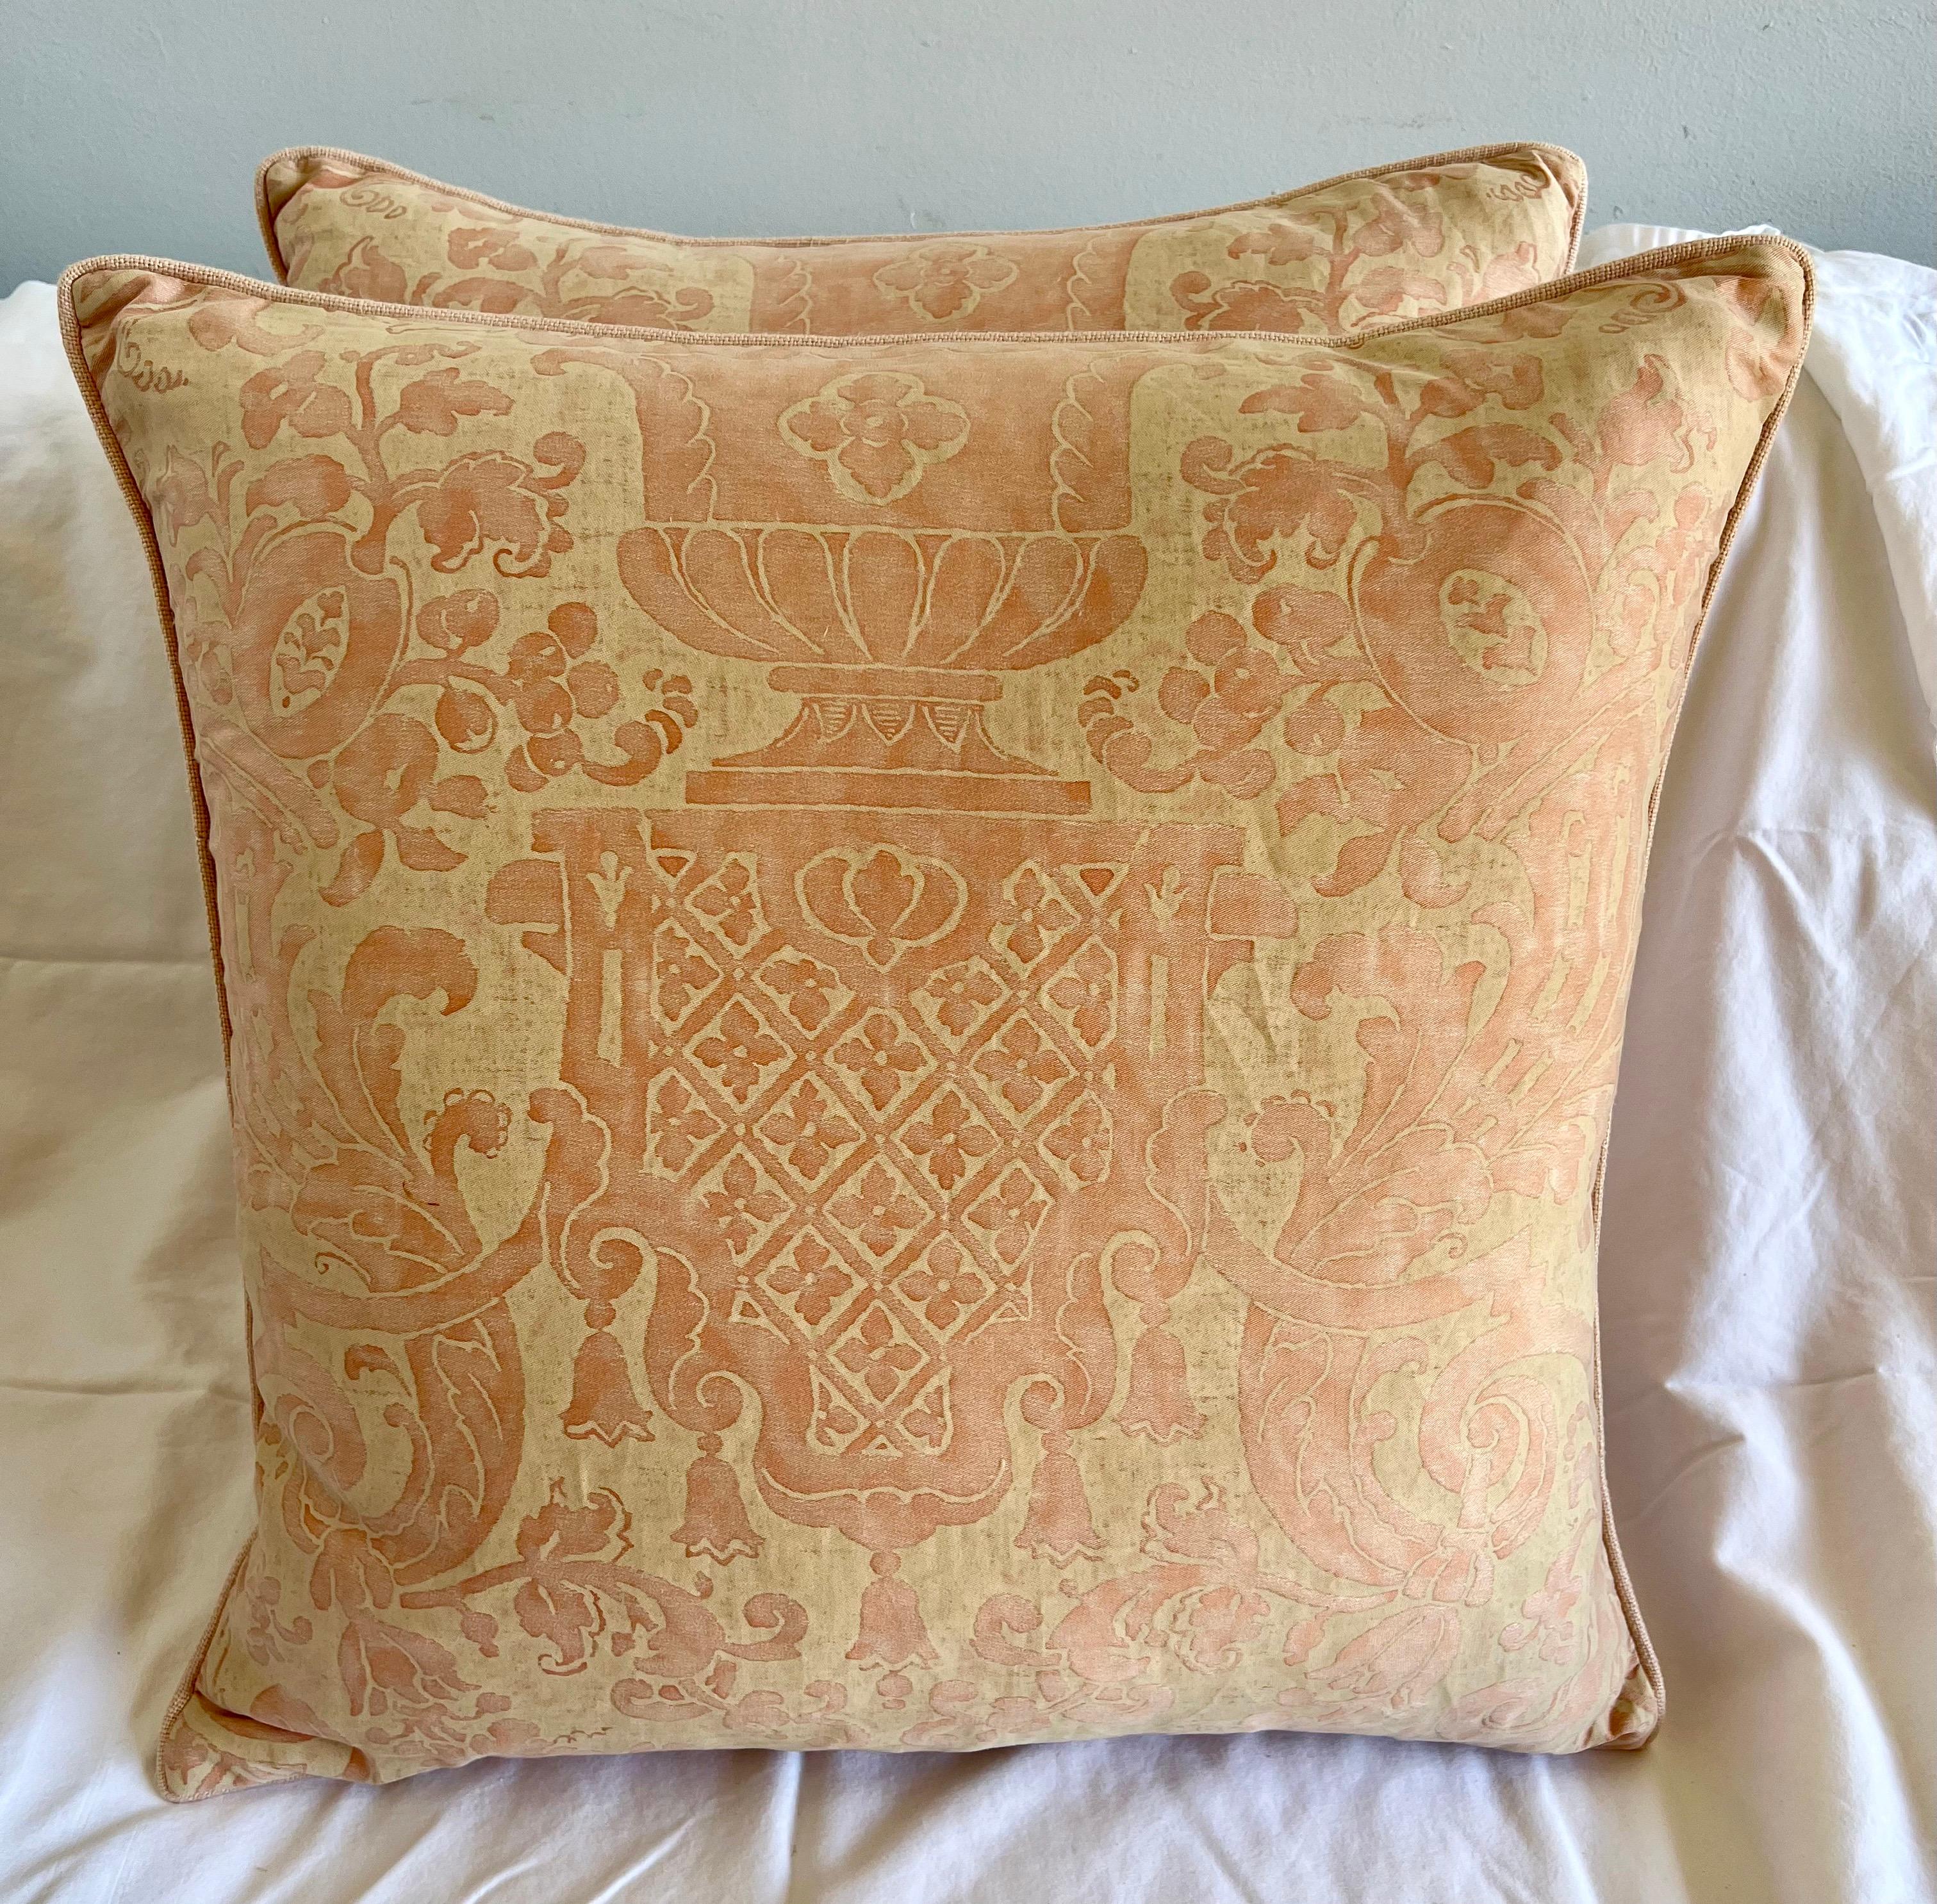 Pair of custom pillows made with vintage pink & cream Fortuny cotton fronts and cream colored velvet backs. Self cording, down inserts, sewn closed.